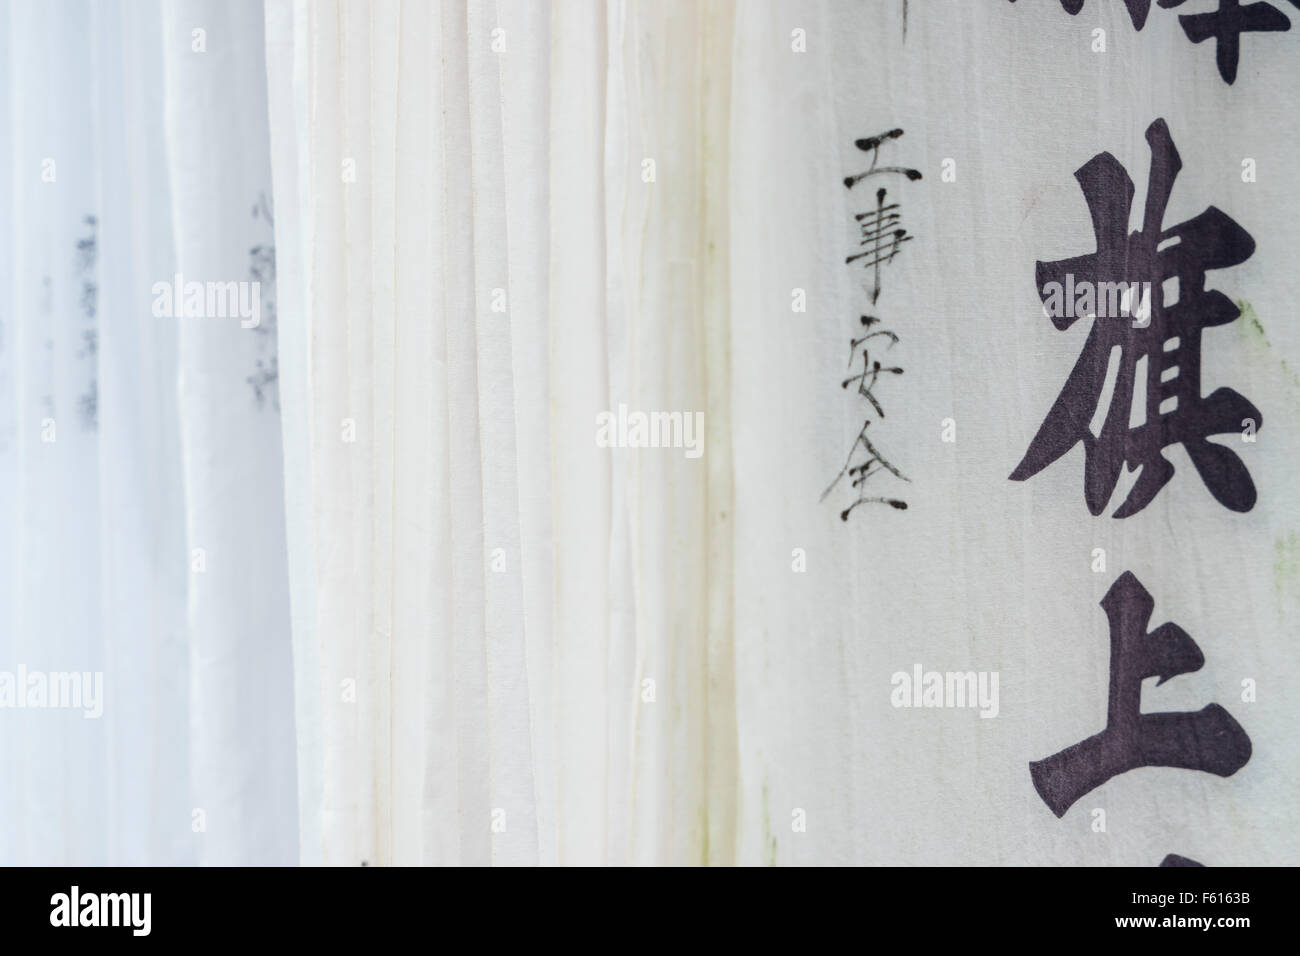 Japanese flags with kanji characters at a Buddhist temple in Tokyo, Japan. Stock Photo